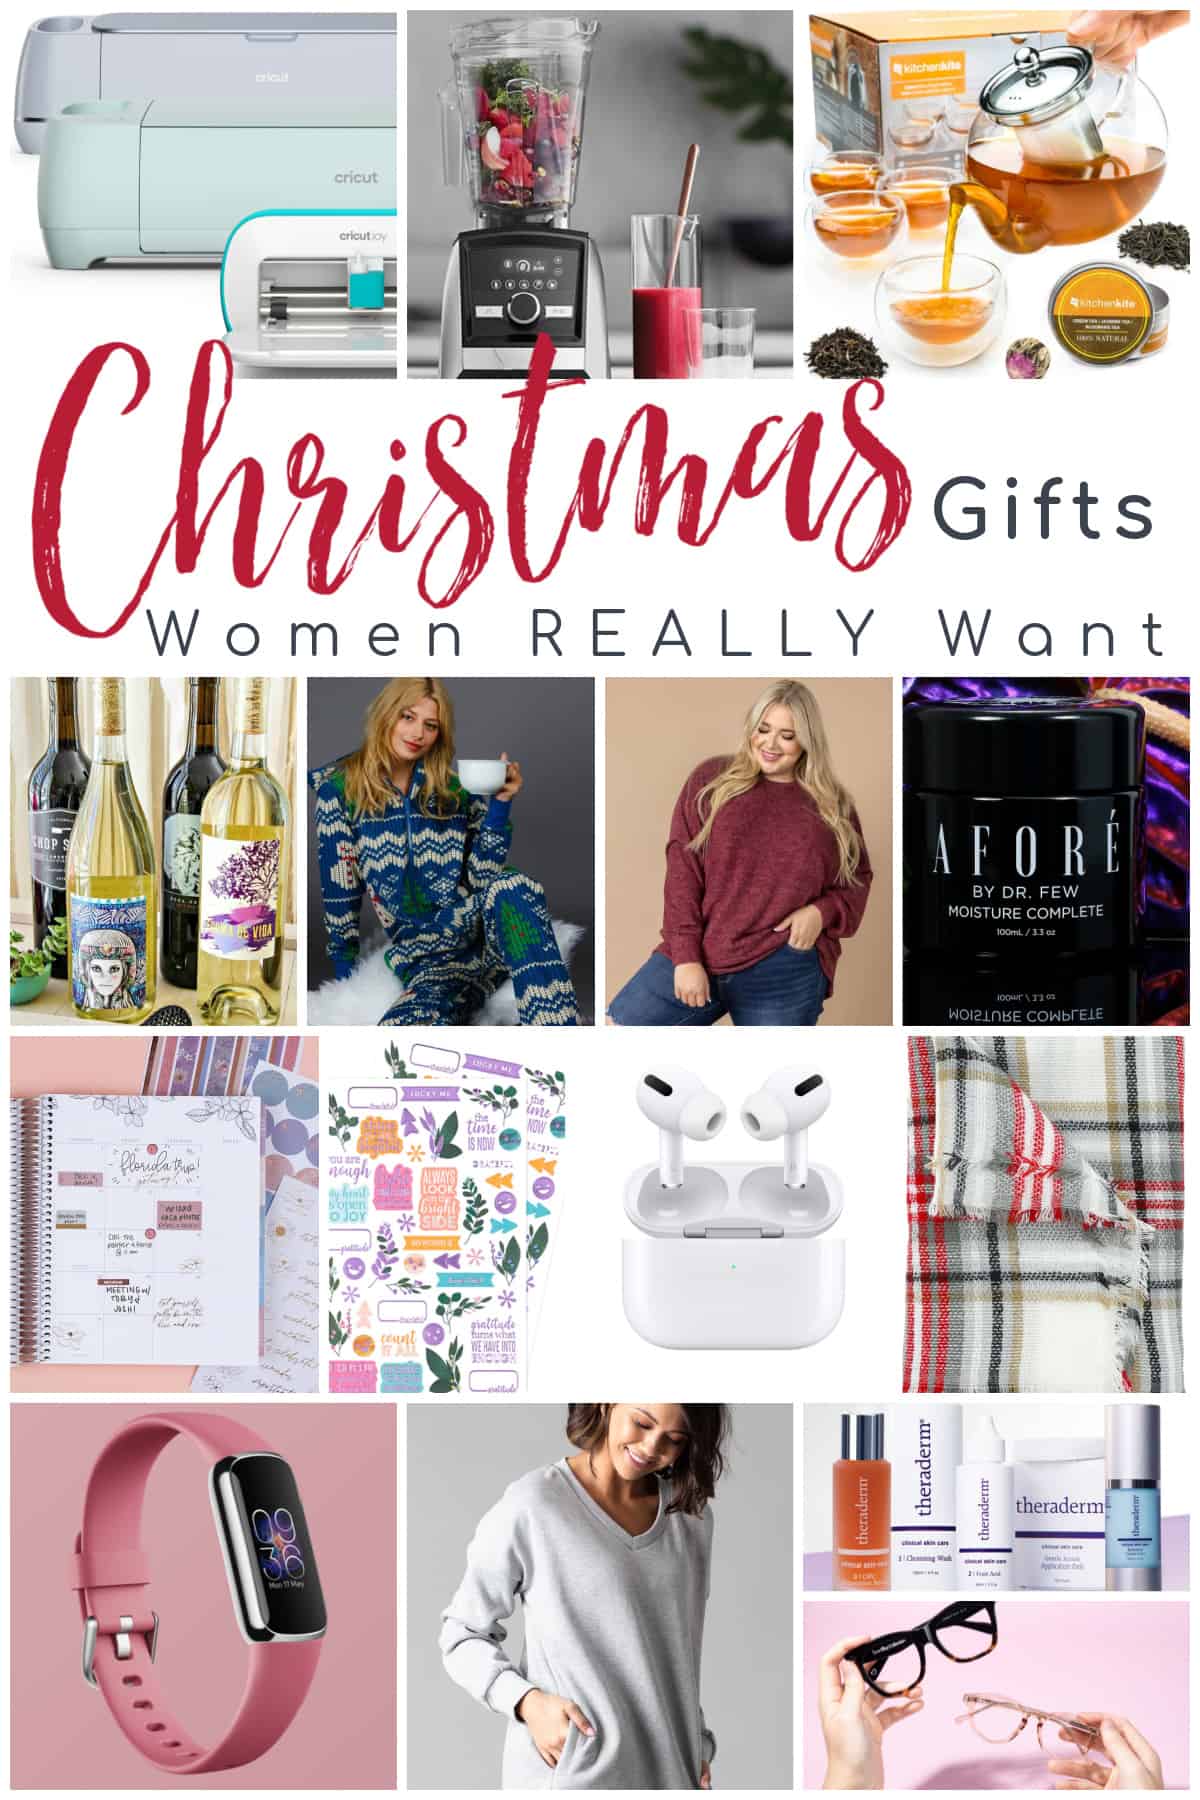 https://www.5minutesformom.com/wp-content/uploads/2021/11/Christmas-Ideas-for-Women-Gifts-Women-Really-Want.jpeg